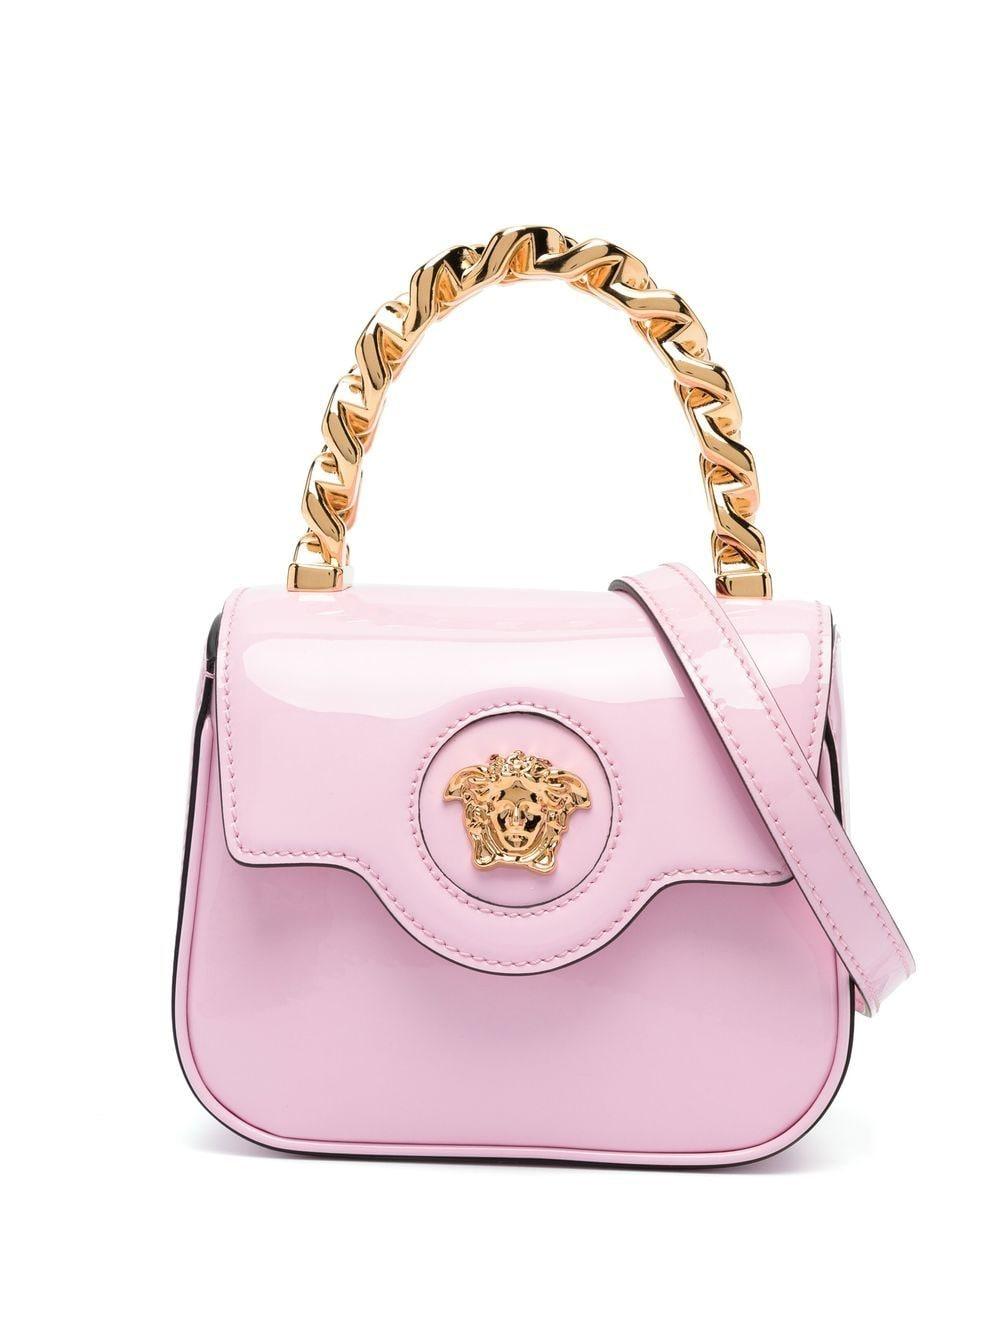 Versace Medusa Patent Leather Mini Bag in Pink | Lyst